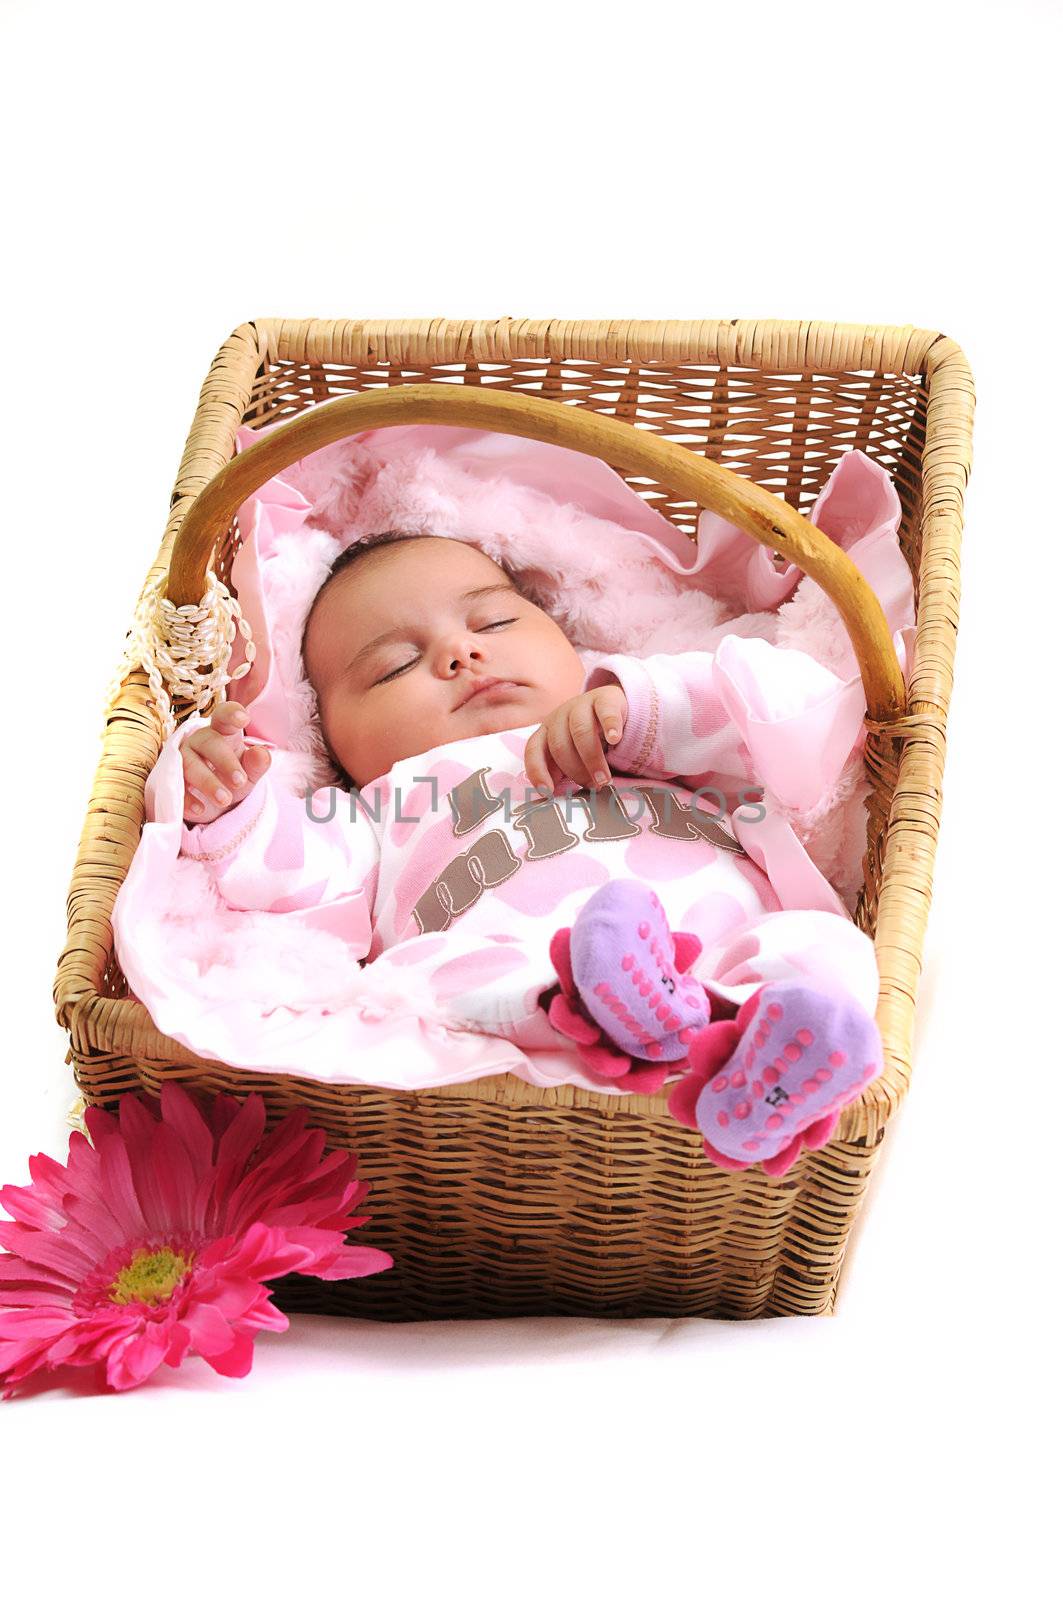 baby girl laying in a basket, white beads and big pink flower by Ansunette